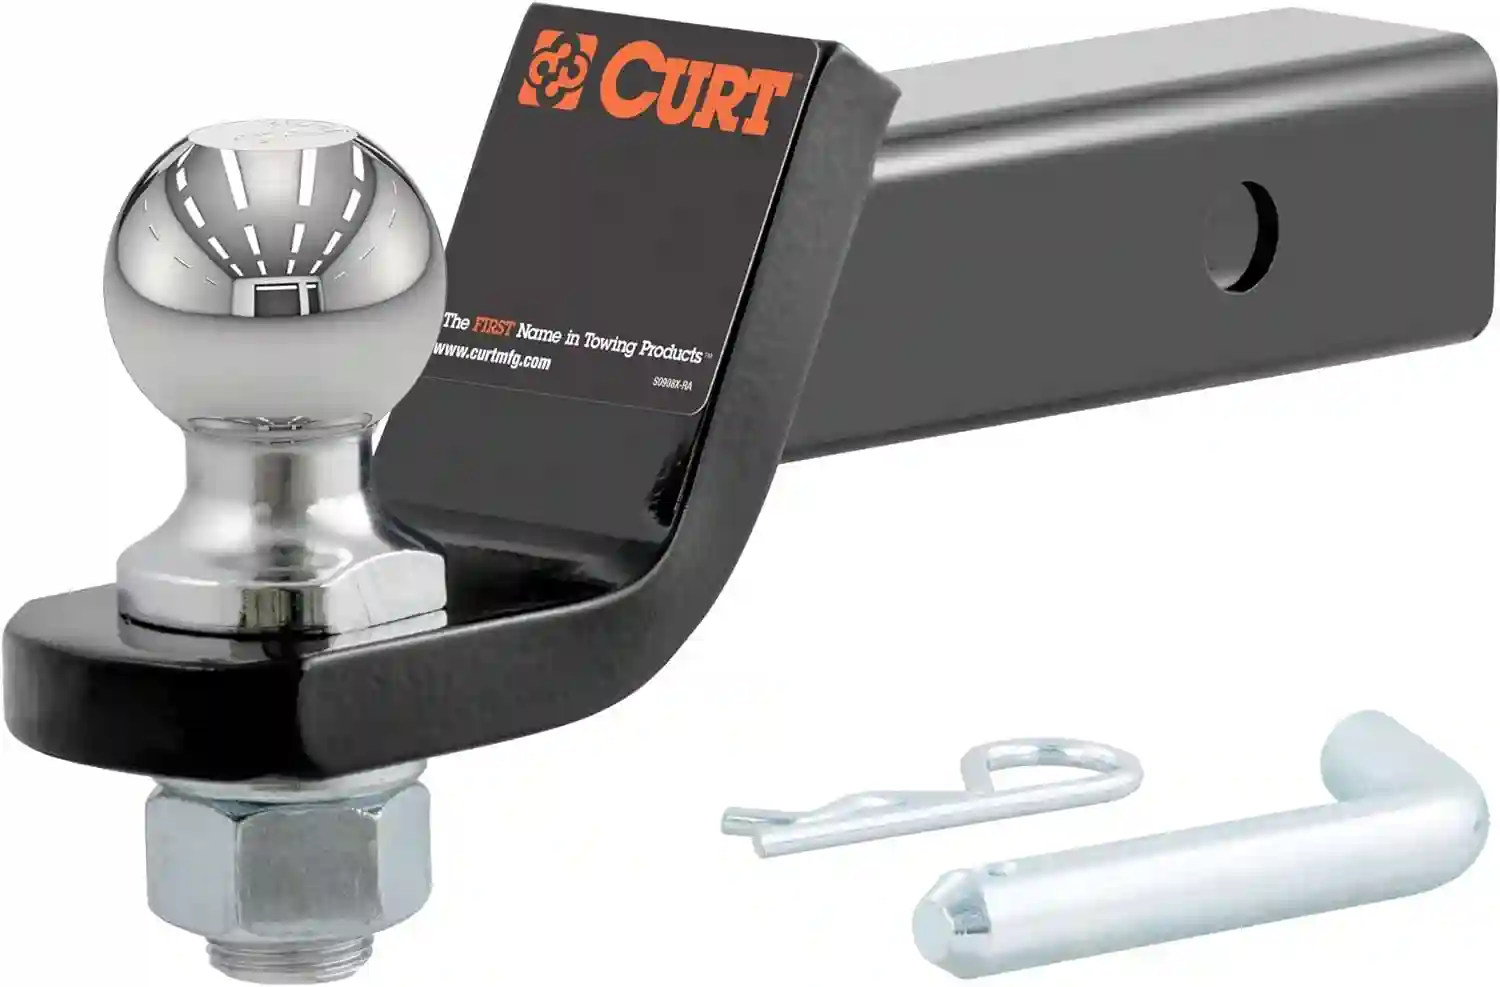 CURT 45036 Trailer Hitch Mount with 2-Inch Ball & Pin, Fits 2-in Receiver, 7,500 lbs, 2" Drop, GLOSS BLACK POWDER COAT